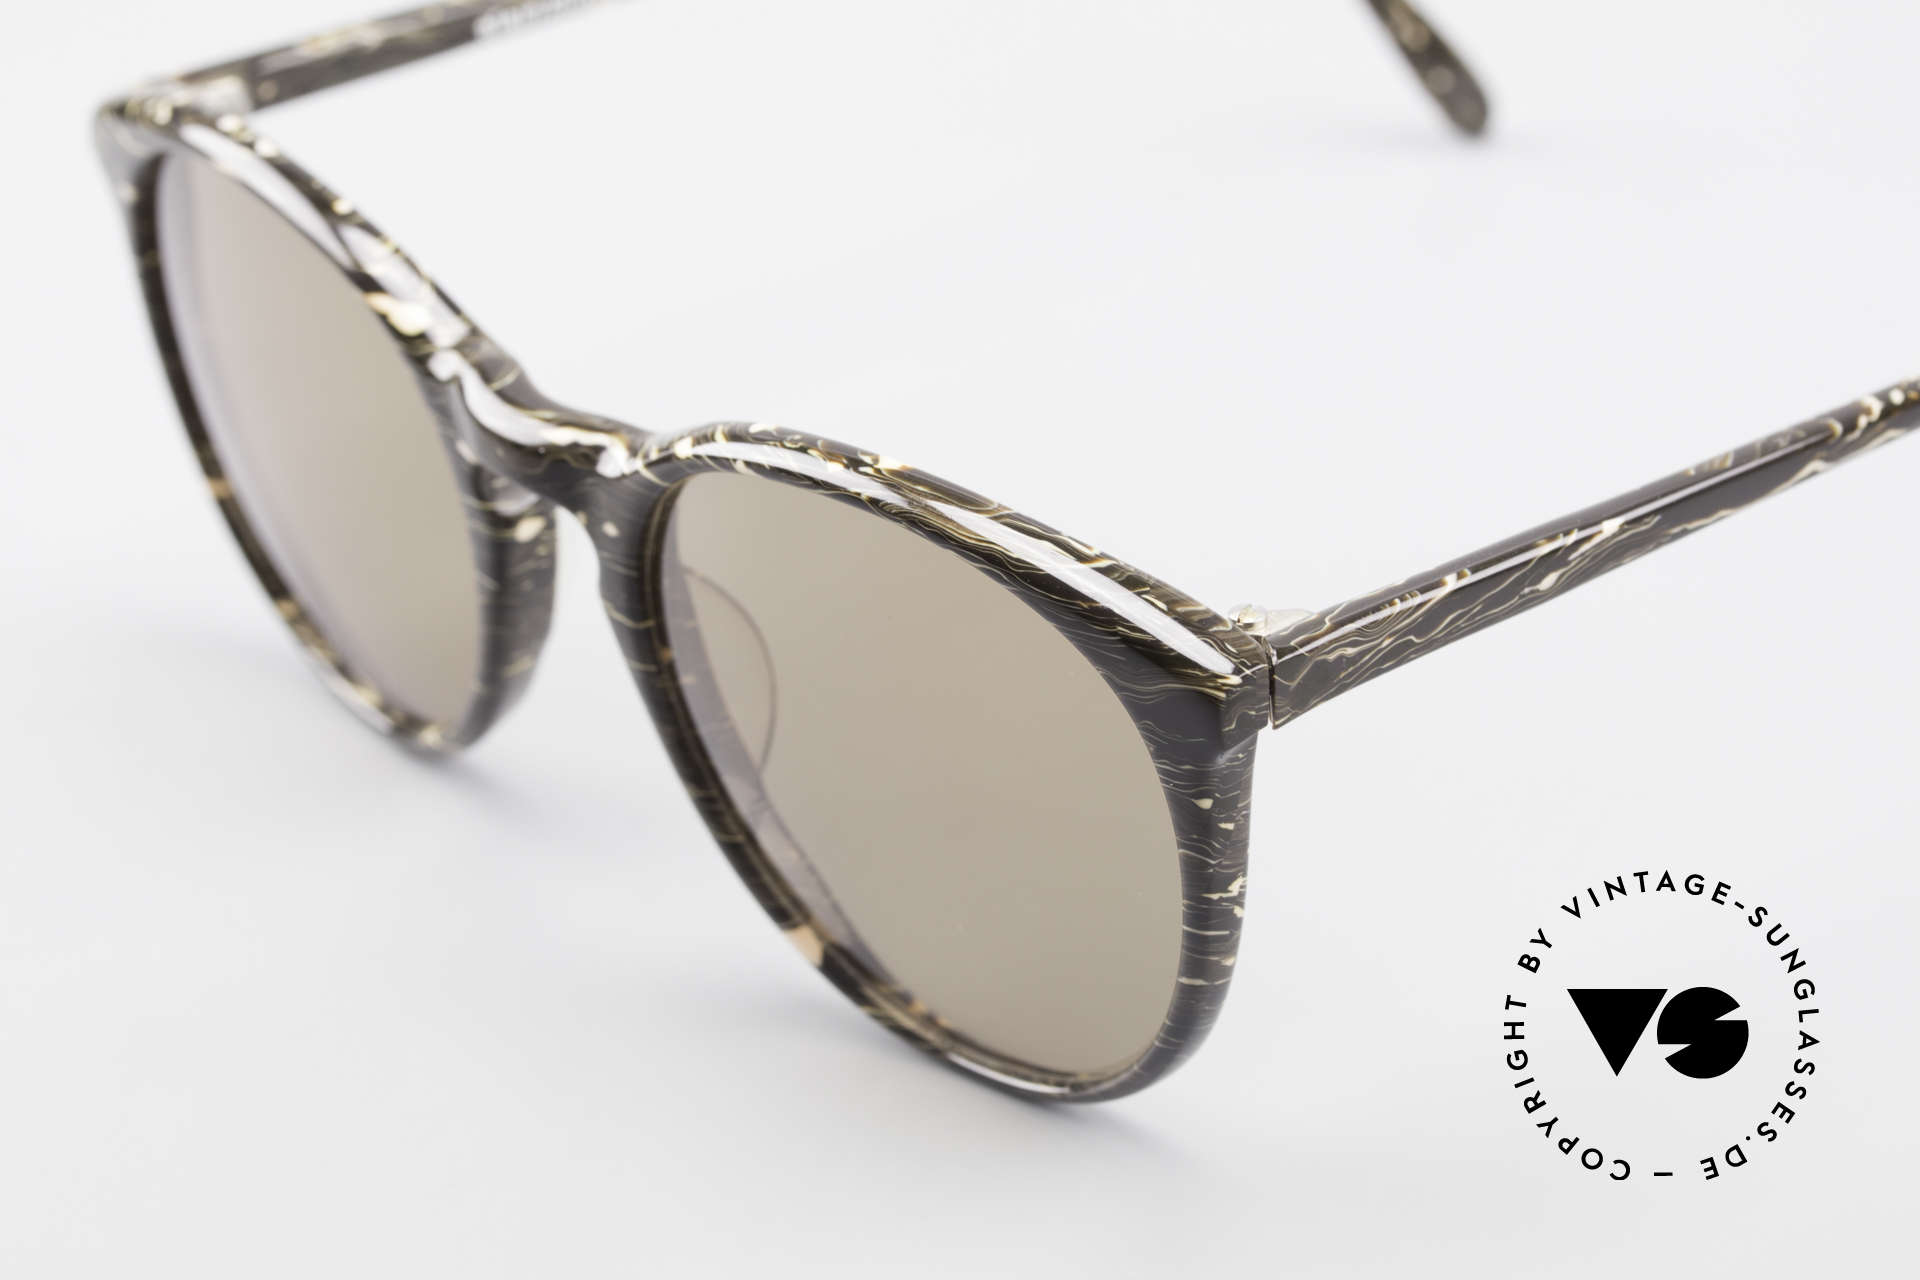 Alain Mikli 901 / 429 Brown Marbled Panto Shades, handmade quality and 121mm width = SMALL size, Made for Men and Women